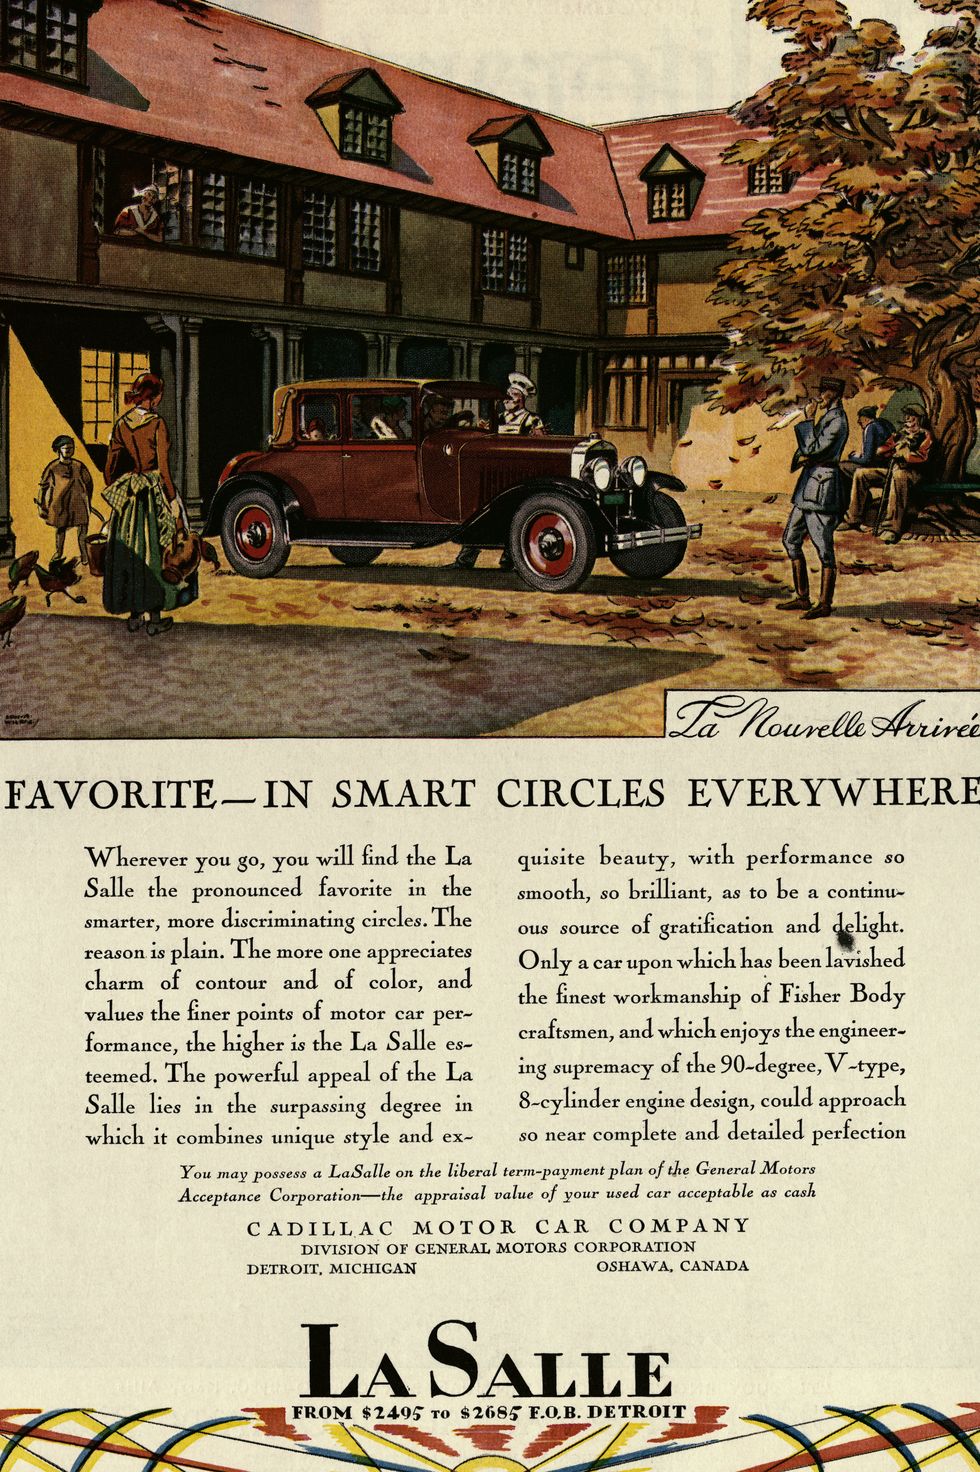 most popular car the year you were born, history of cars, motor vehicle, vehicle, car, vintage car, vintage advertisement, classic, advertising, classic car, retro style, brochure,